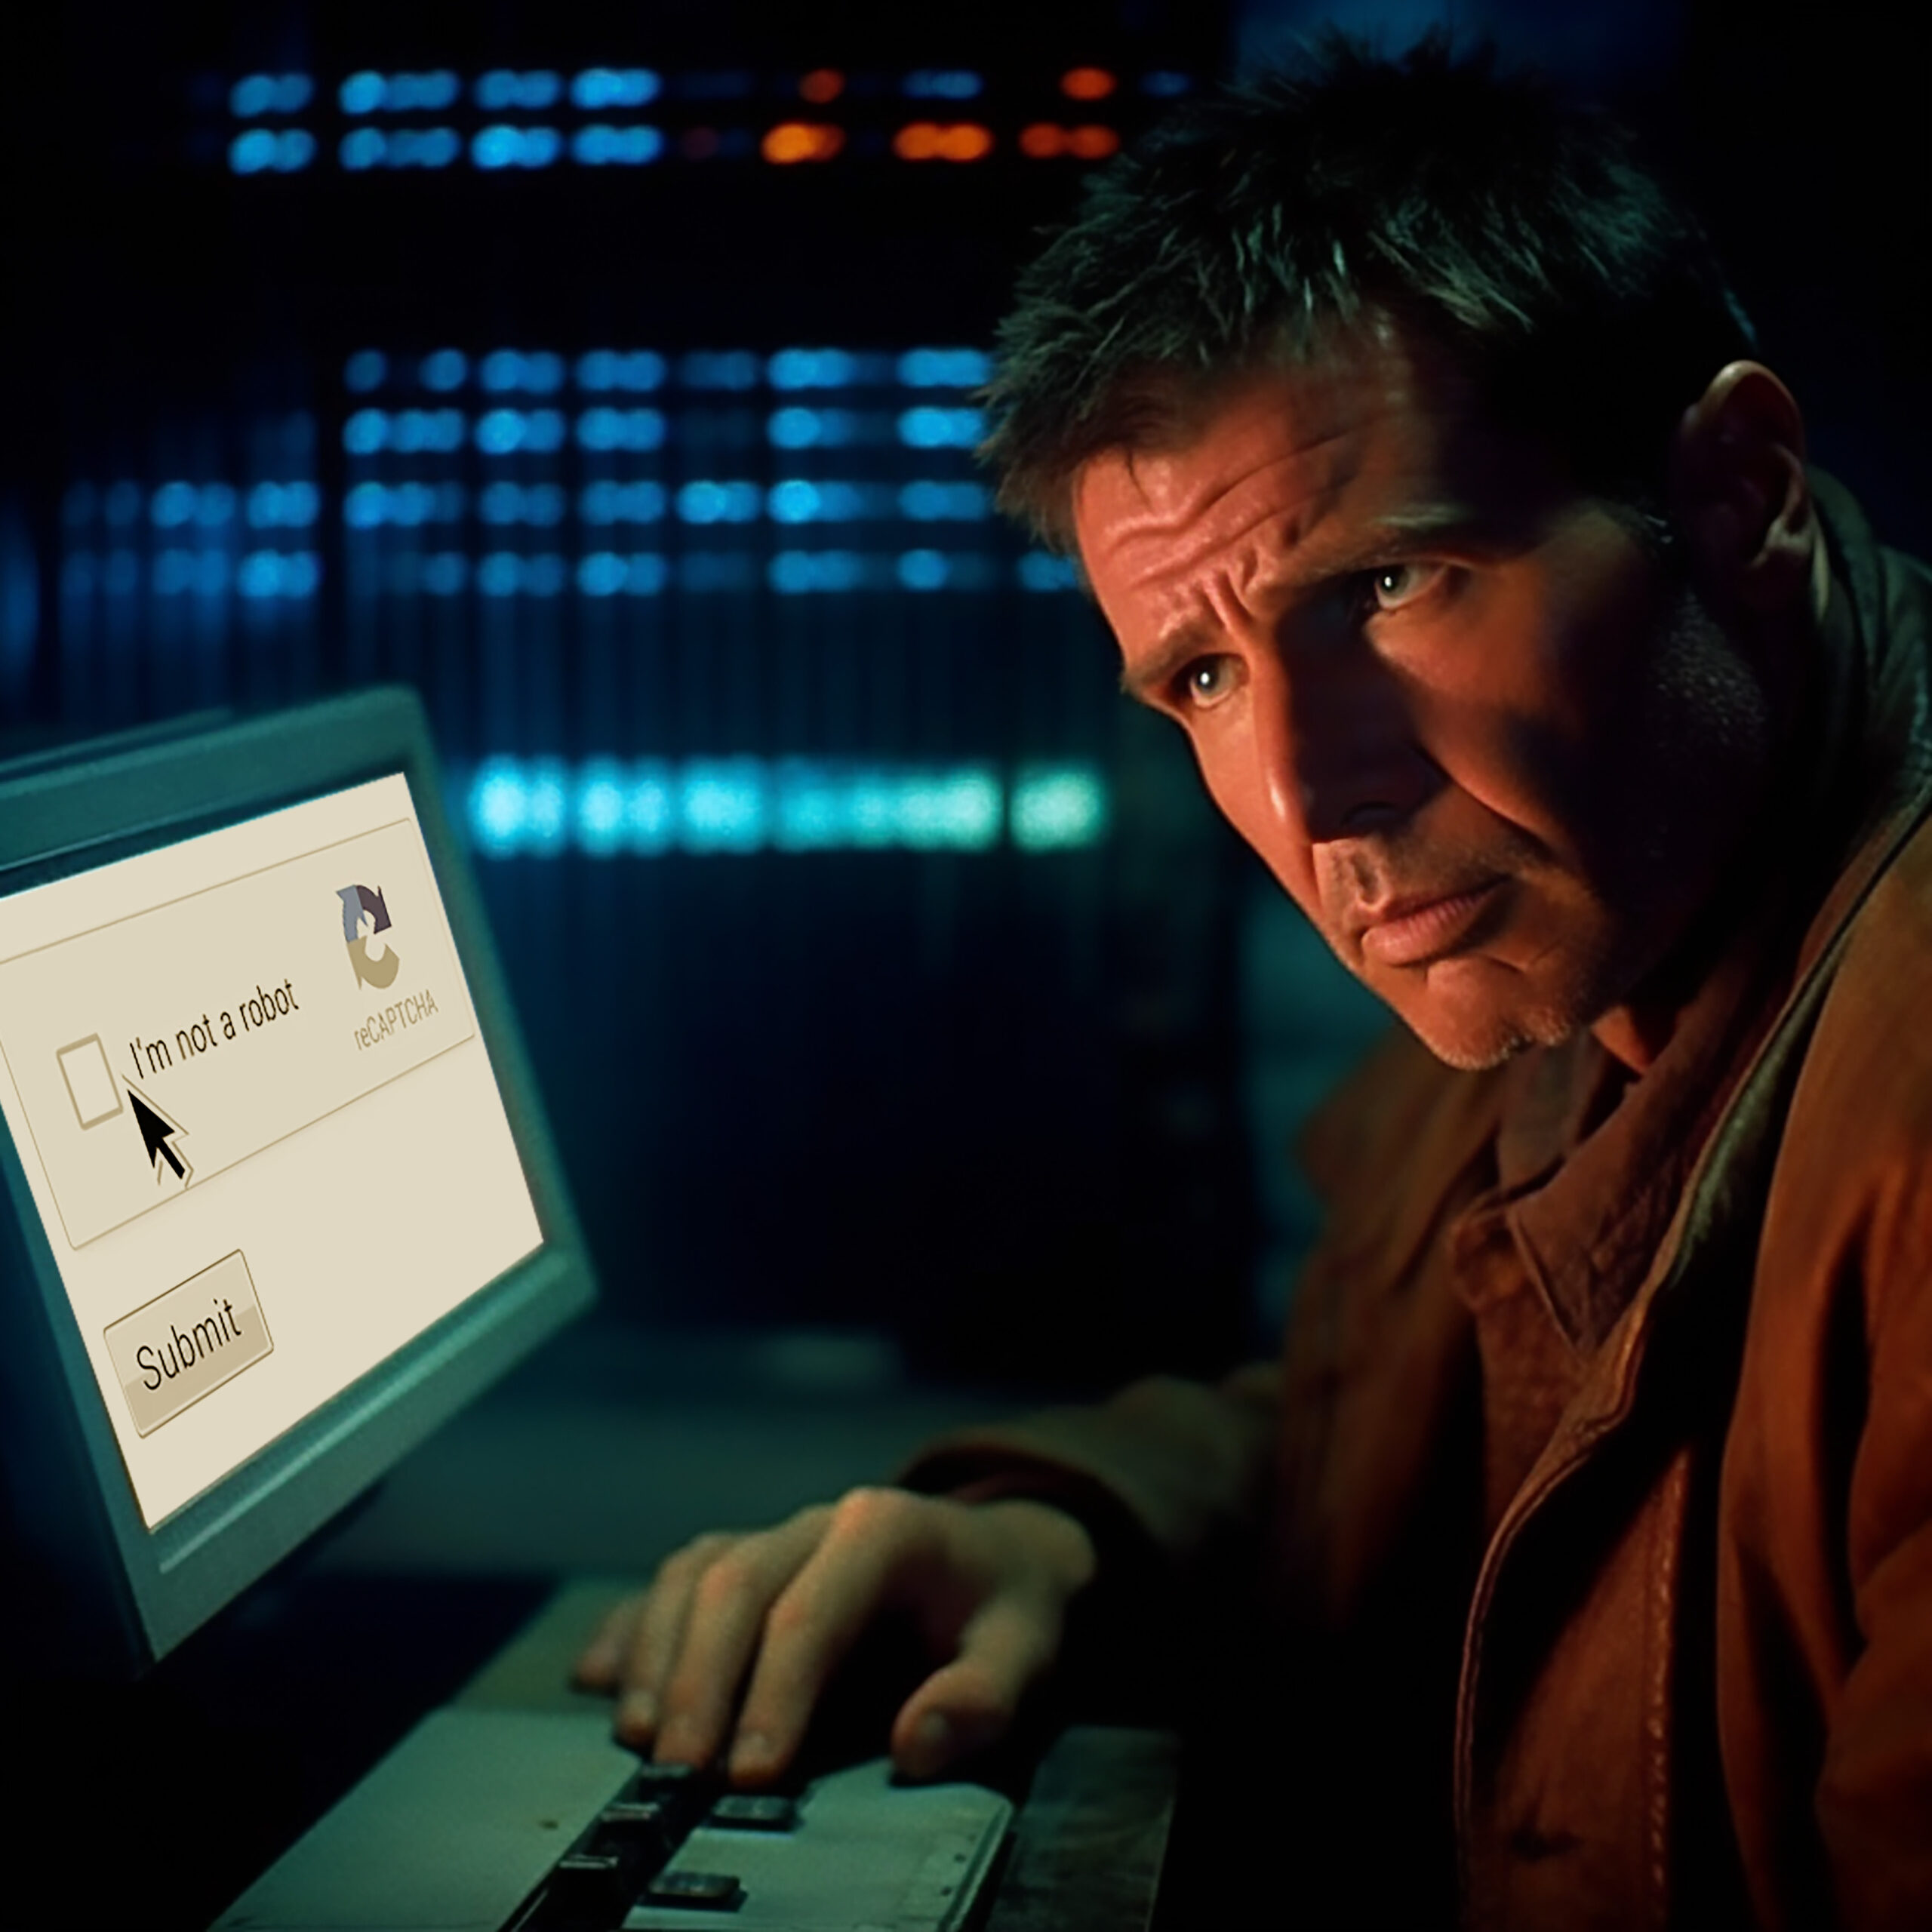 Deckard from Bladerunner contemplates the, "I'm not a robot." Captcha challenge. Looking unsure.